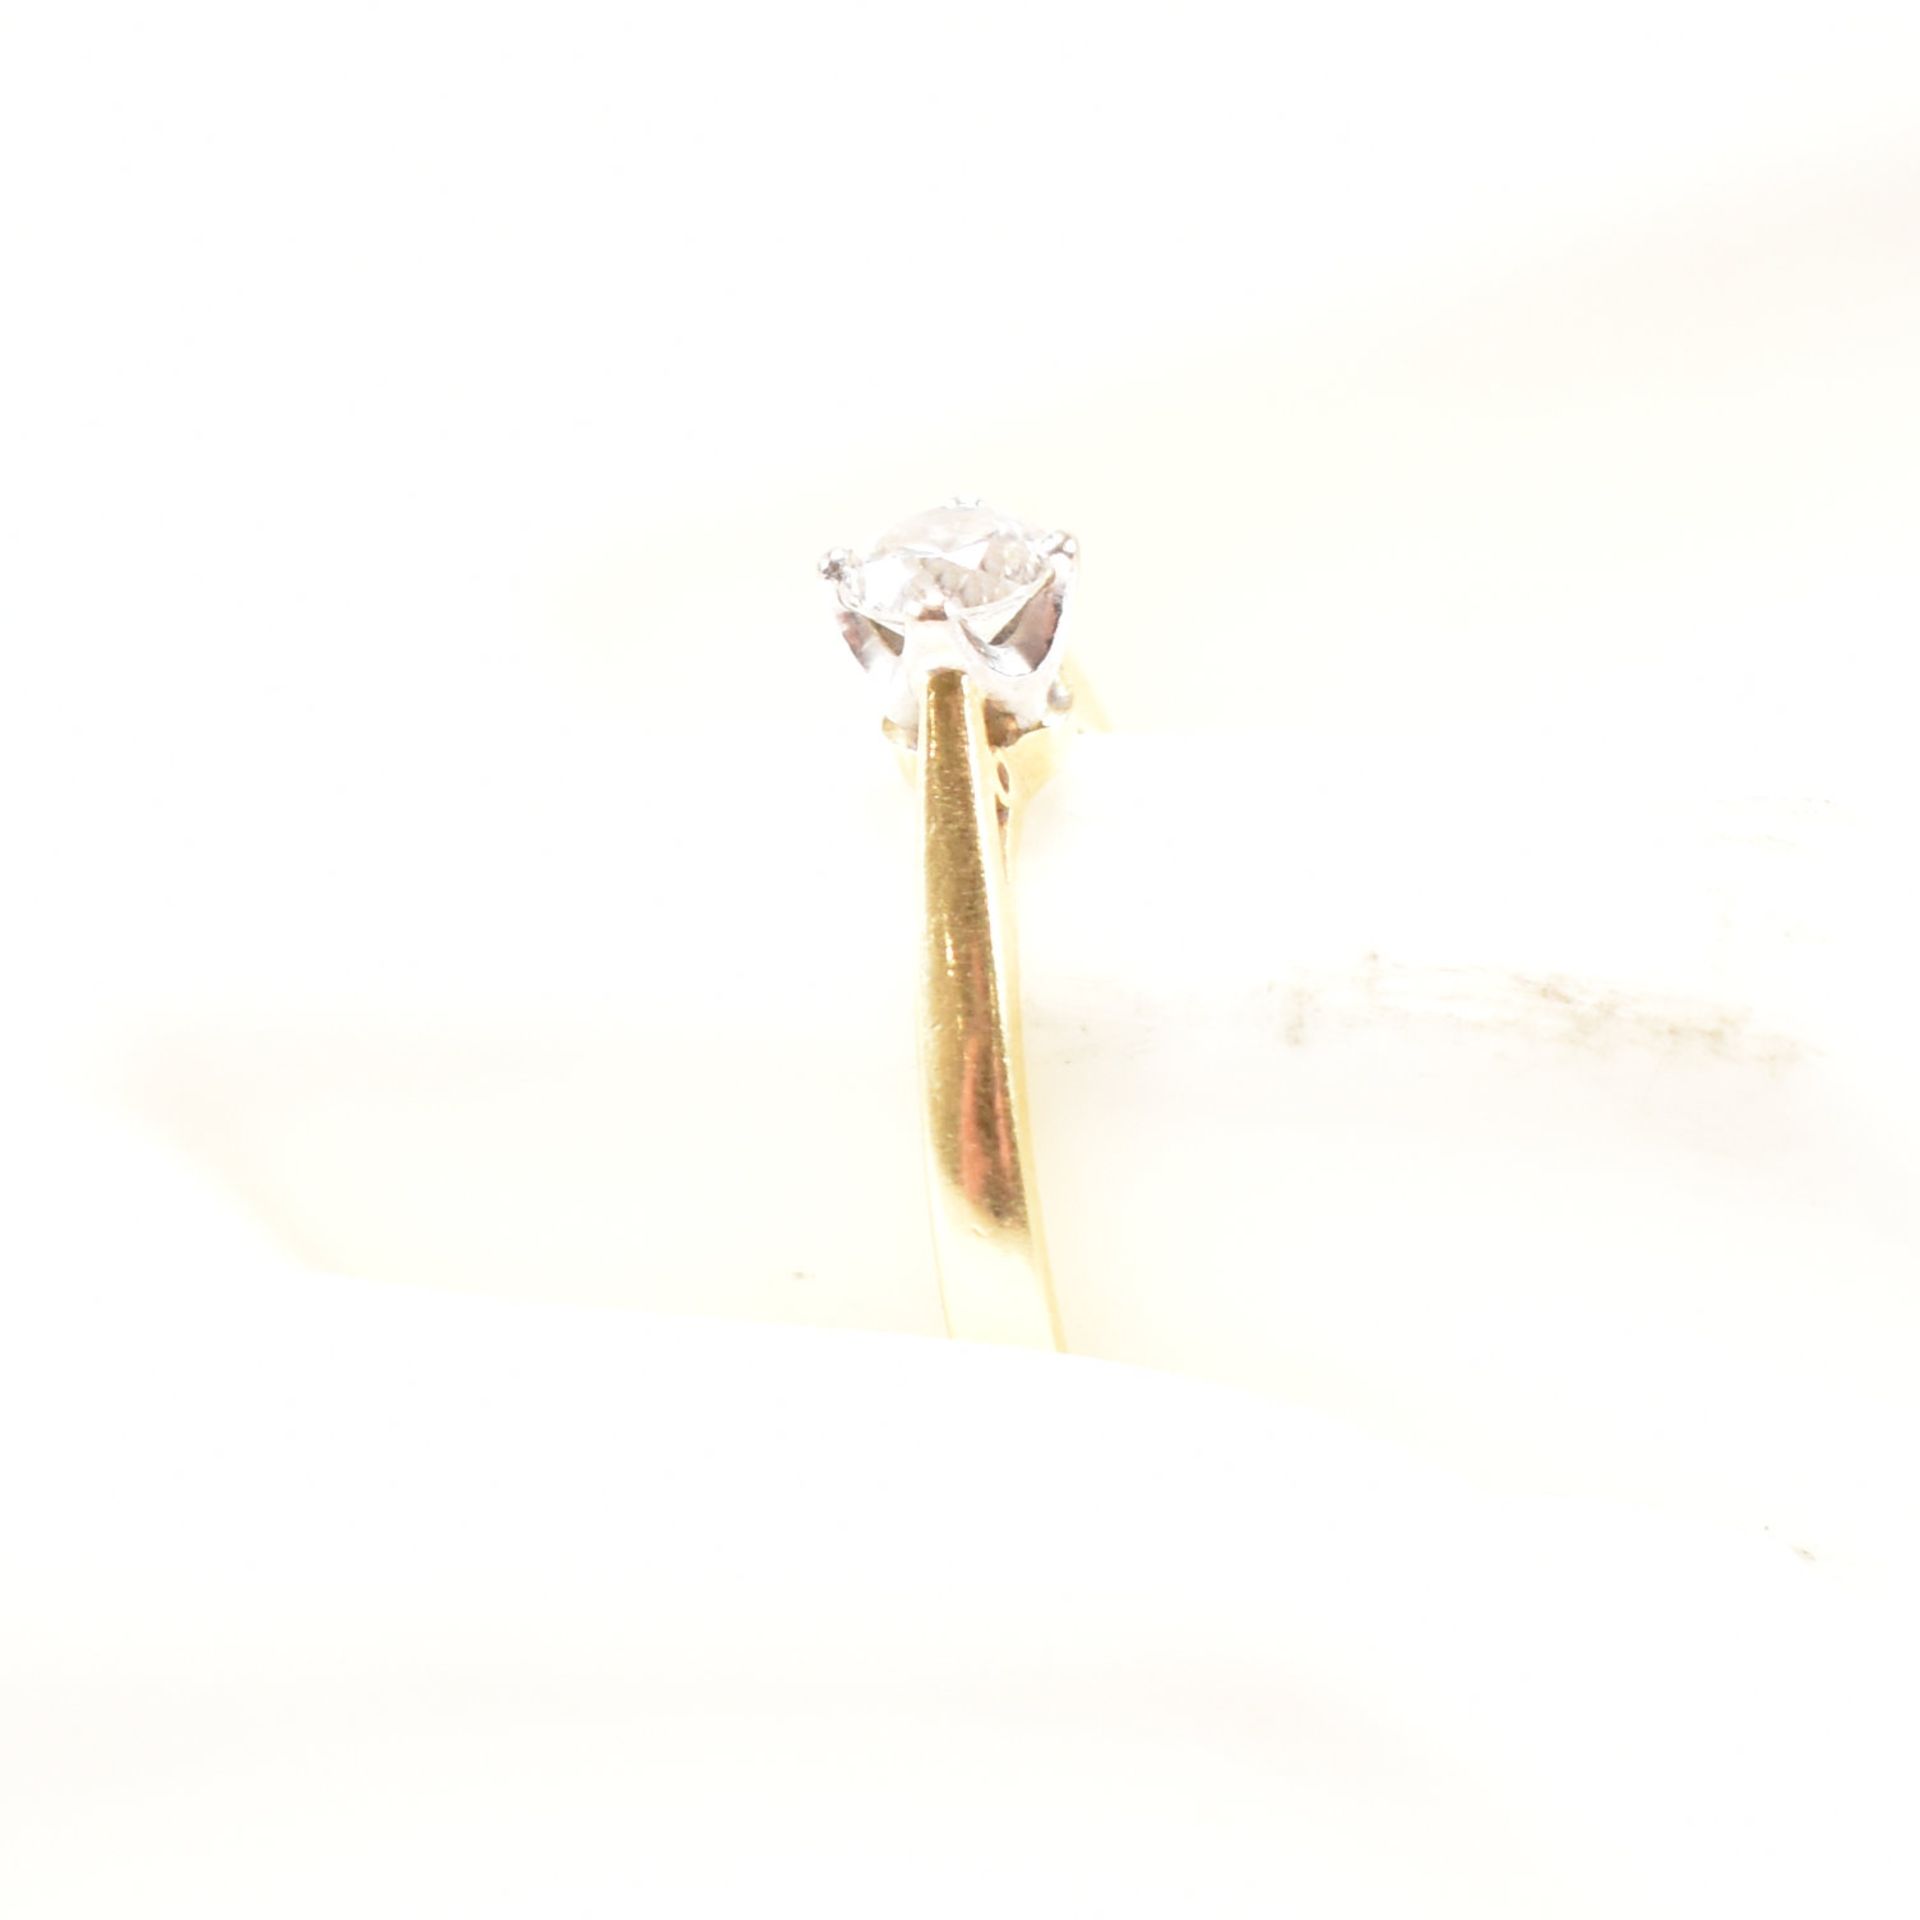 HALLMARKED 9CT GOLD & DIAMOND SOLITAIRE RING - Image 7 of 8